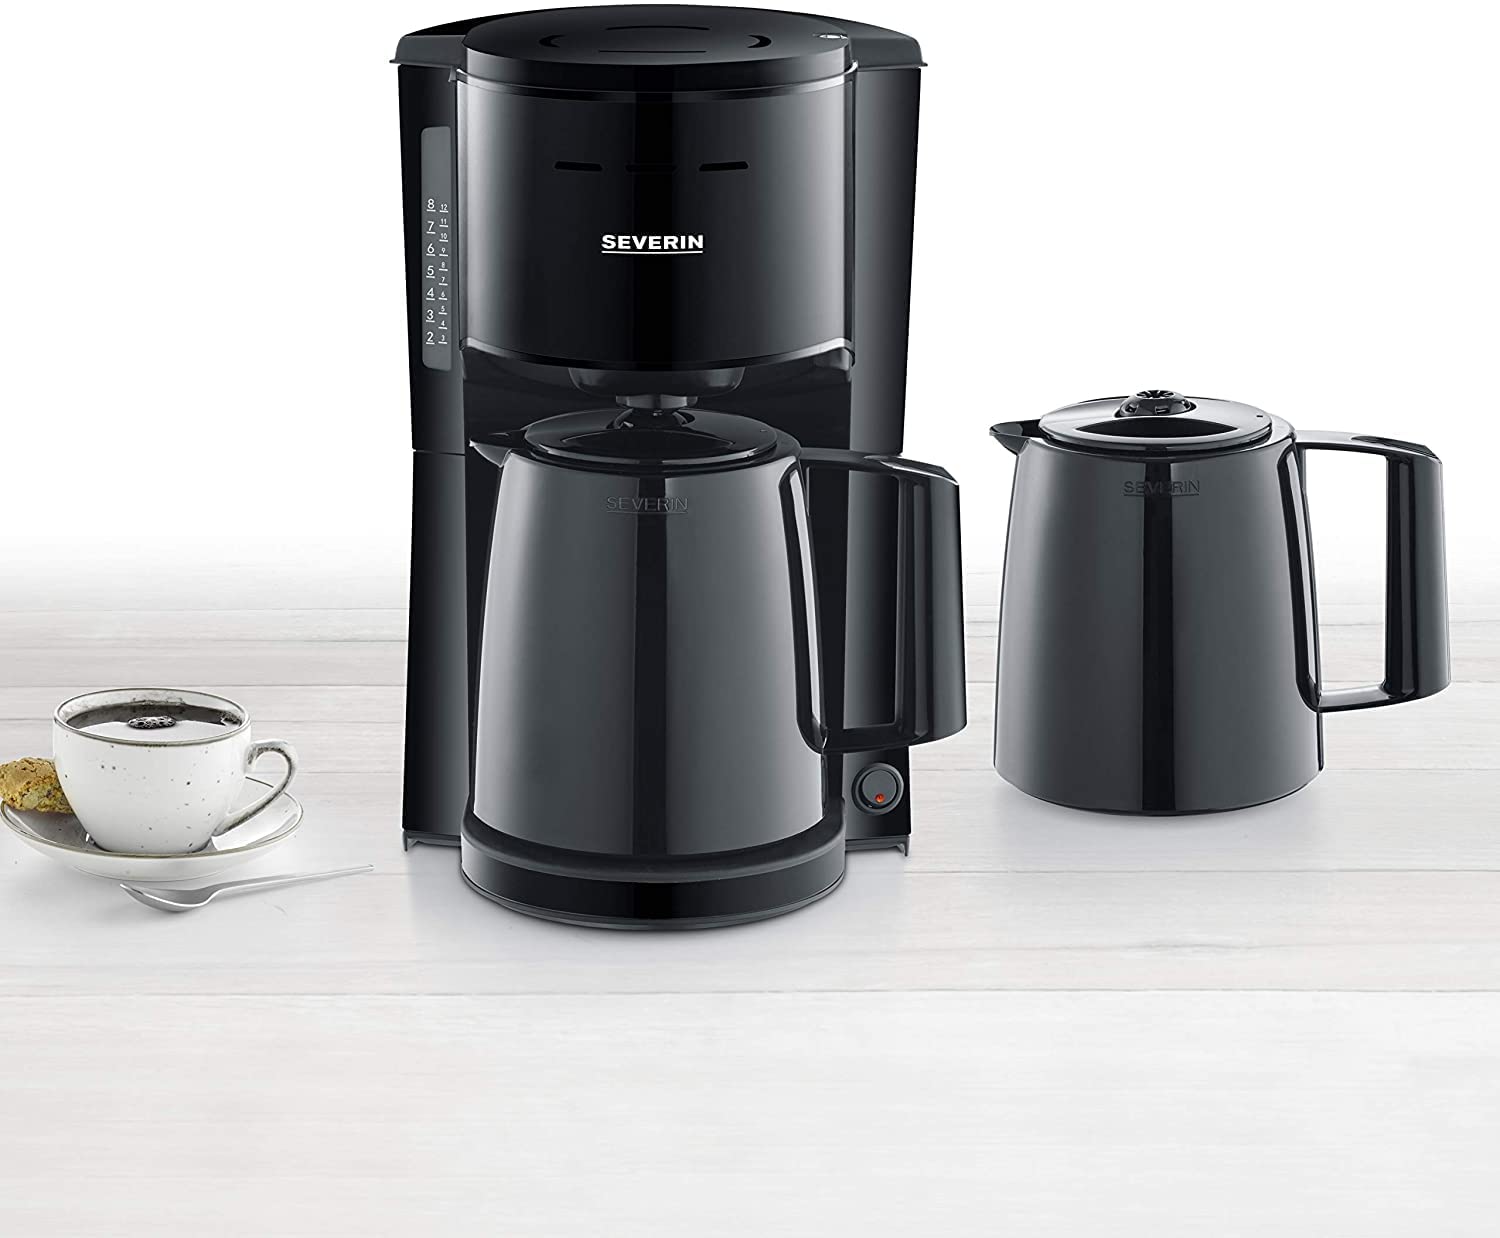 SEVERIN KA 9252 Filter Coffee Maker with 2 Thermal Jugs, Approx. 1000 W, up to 8 Cups, Swivel Filter 1 x 4 with Drip Lock, Automatic Shut-Off, Brew Lid, Black